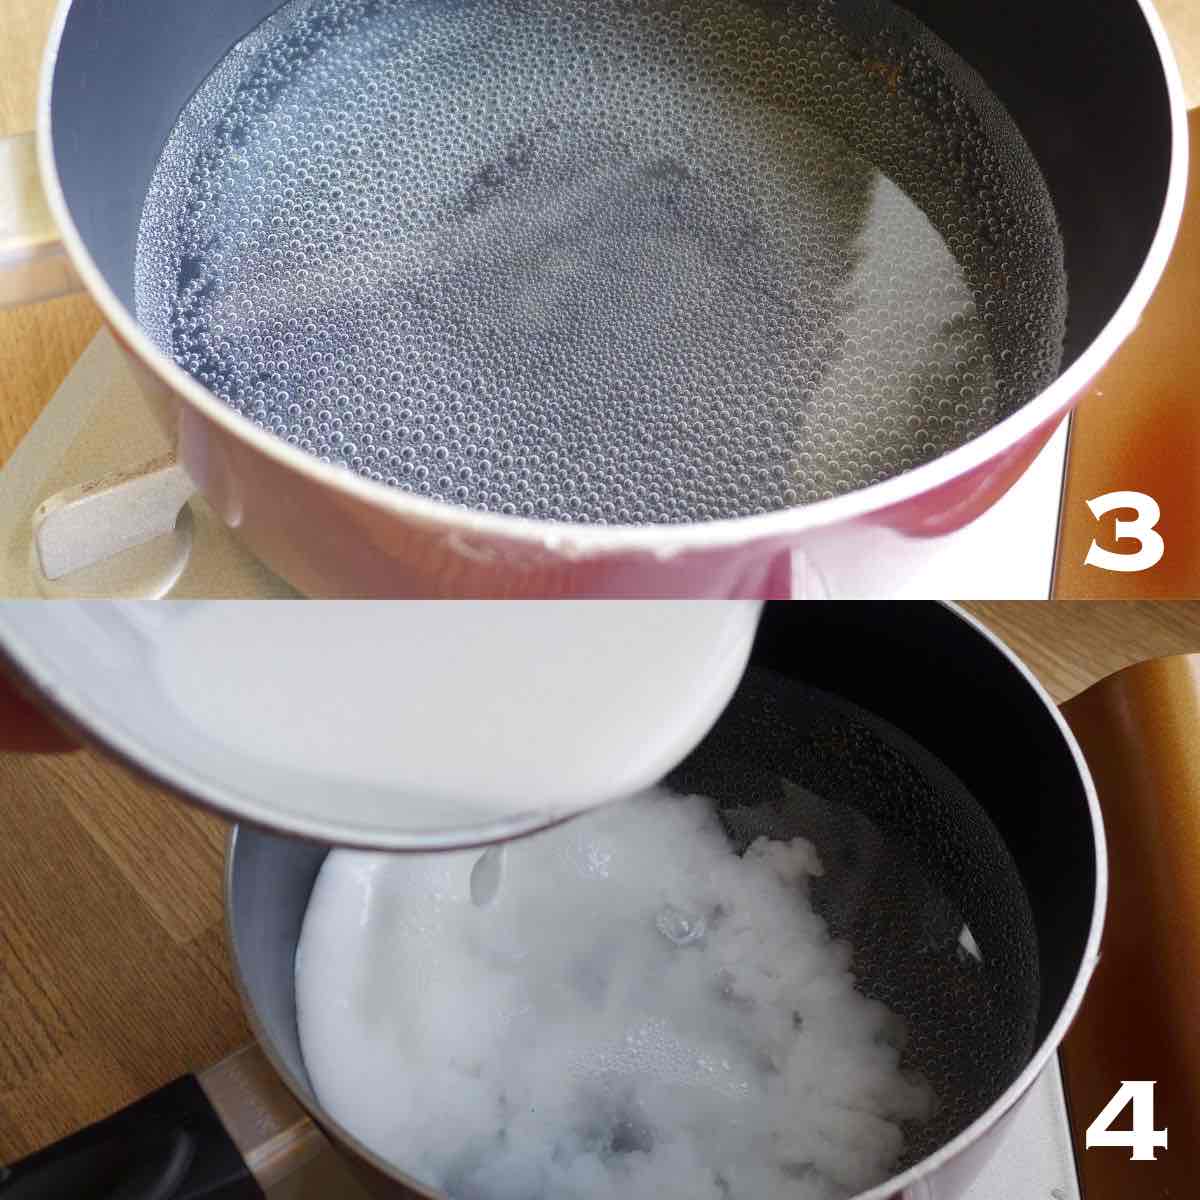 pour the starch water mixture into heated water.